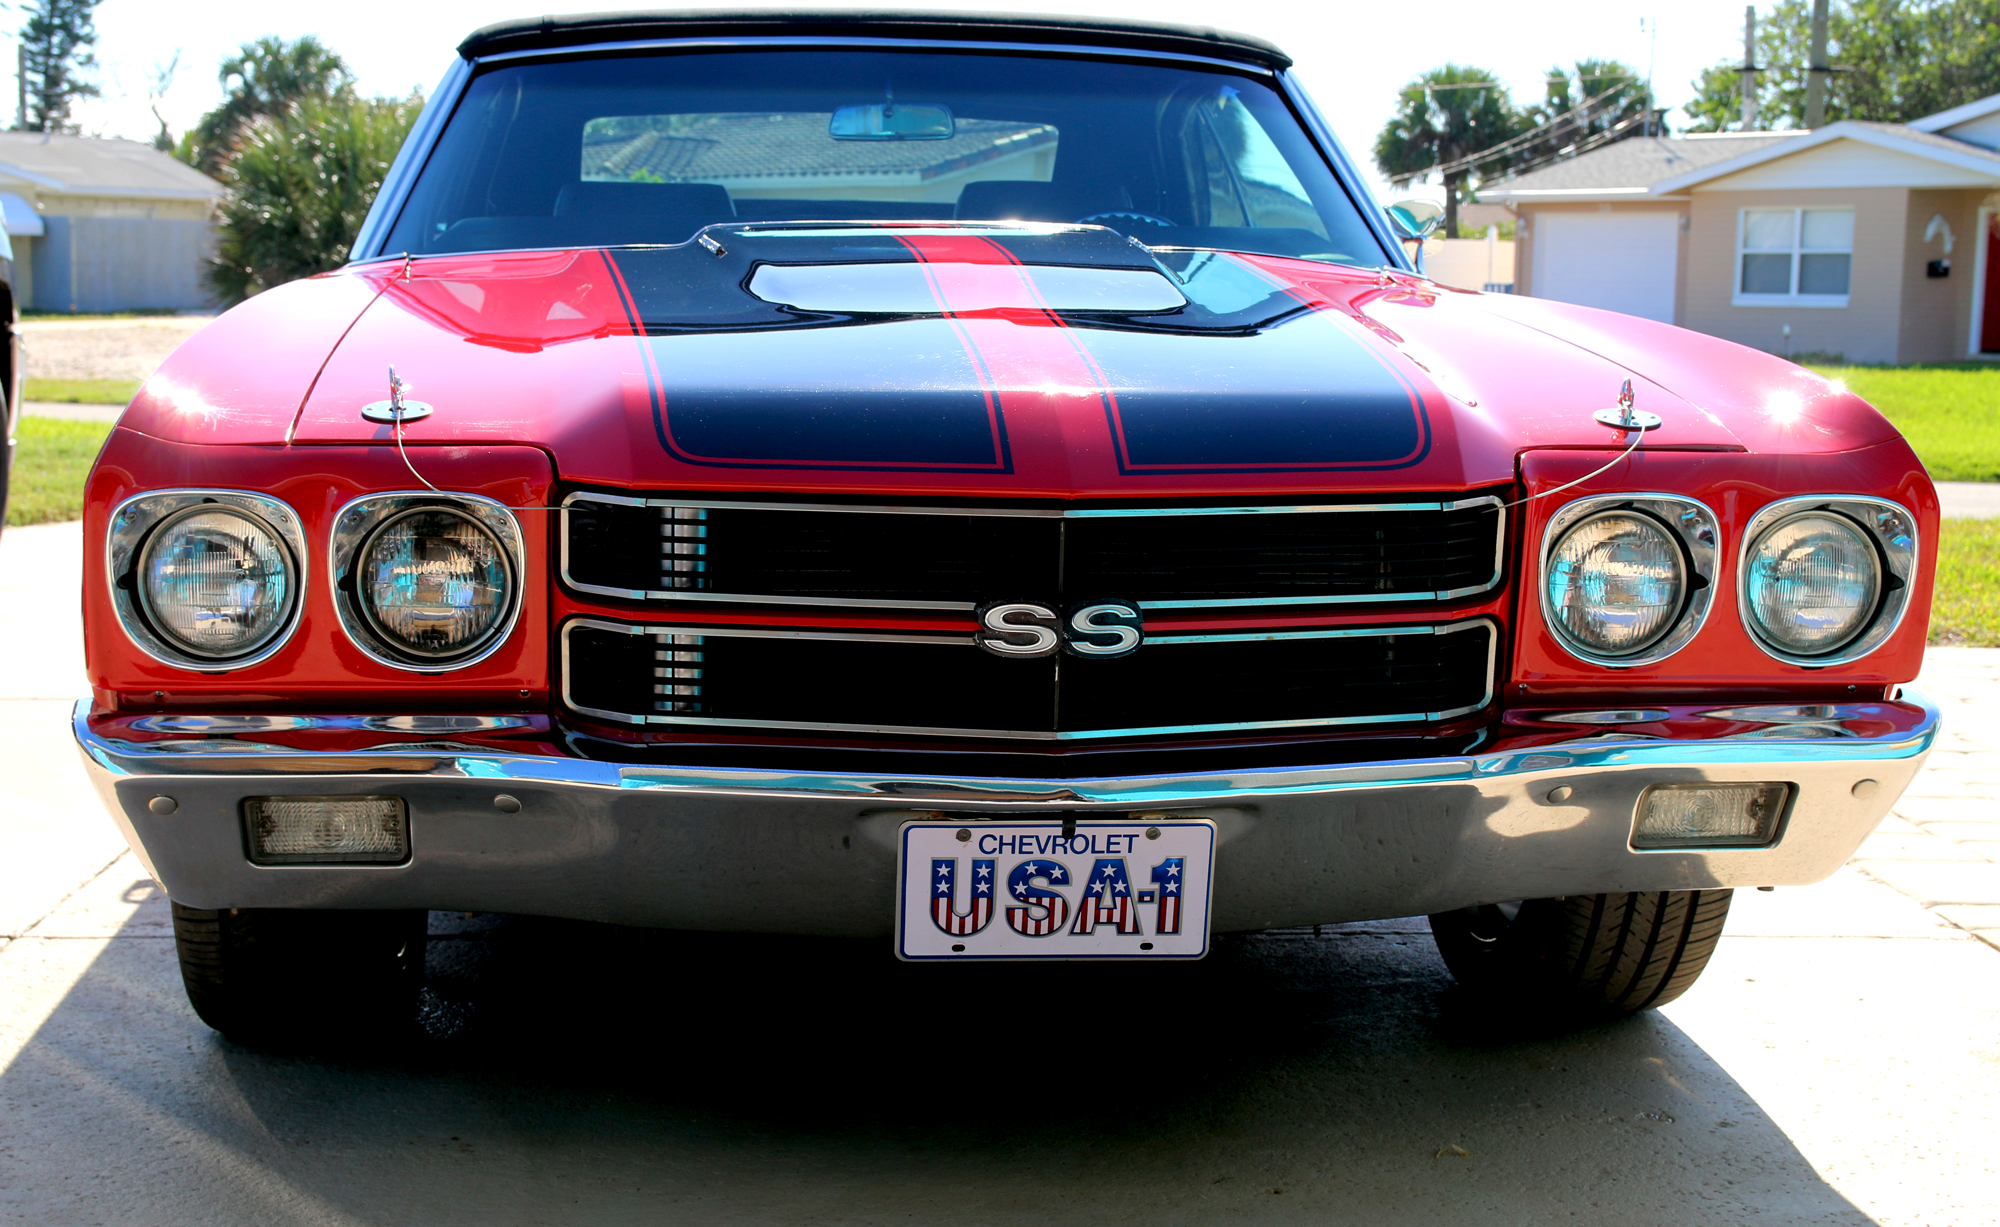 John Jensen bought this 1970 Chevelle in 2006, and it used to be gold. He completed a frame-off restoration back in March. Photo by Jarleene Almenas